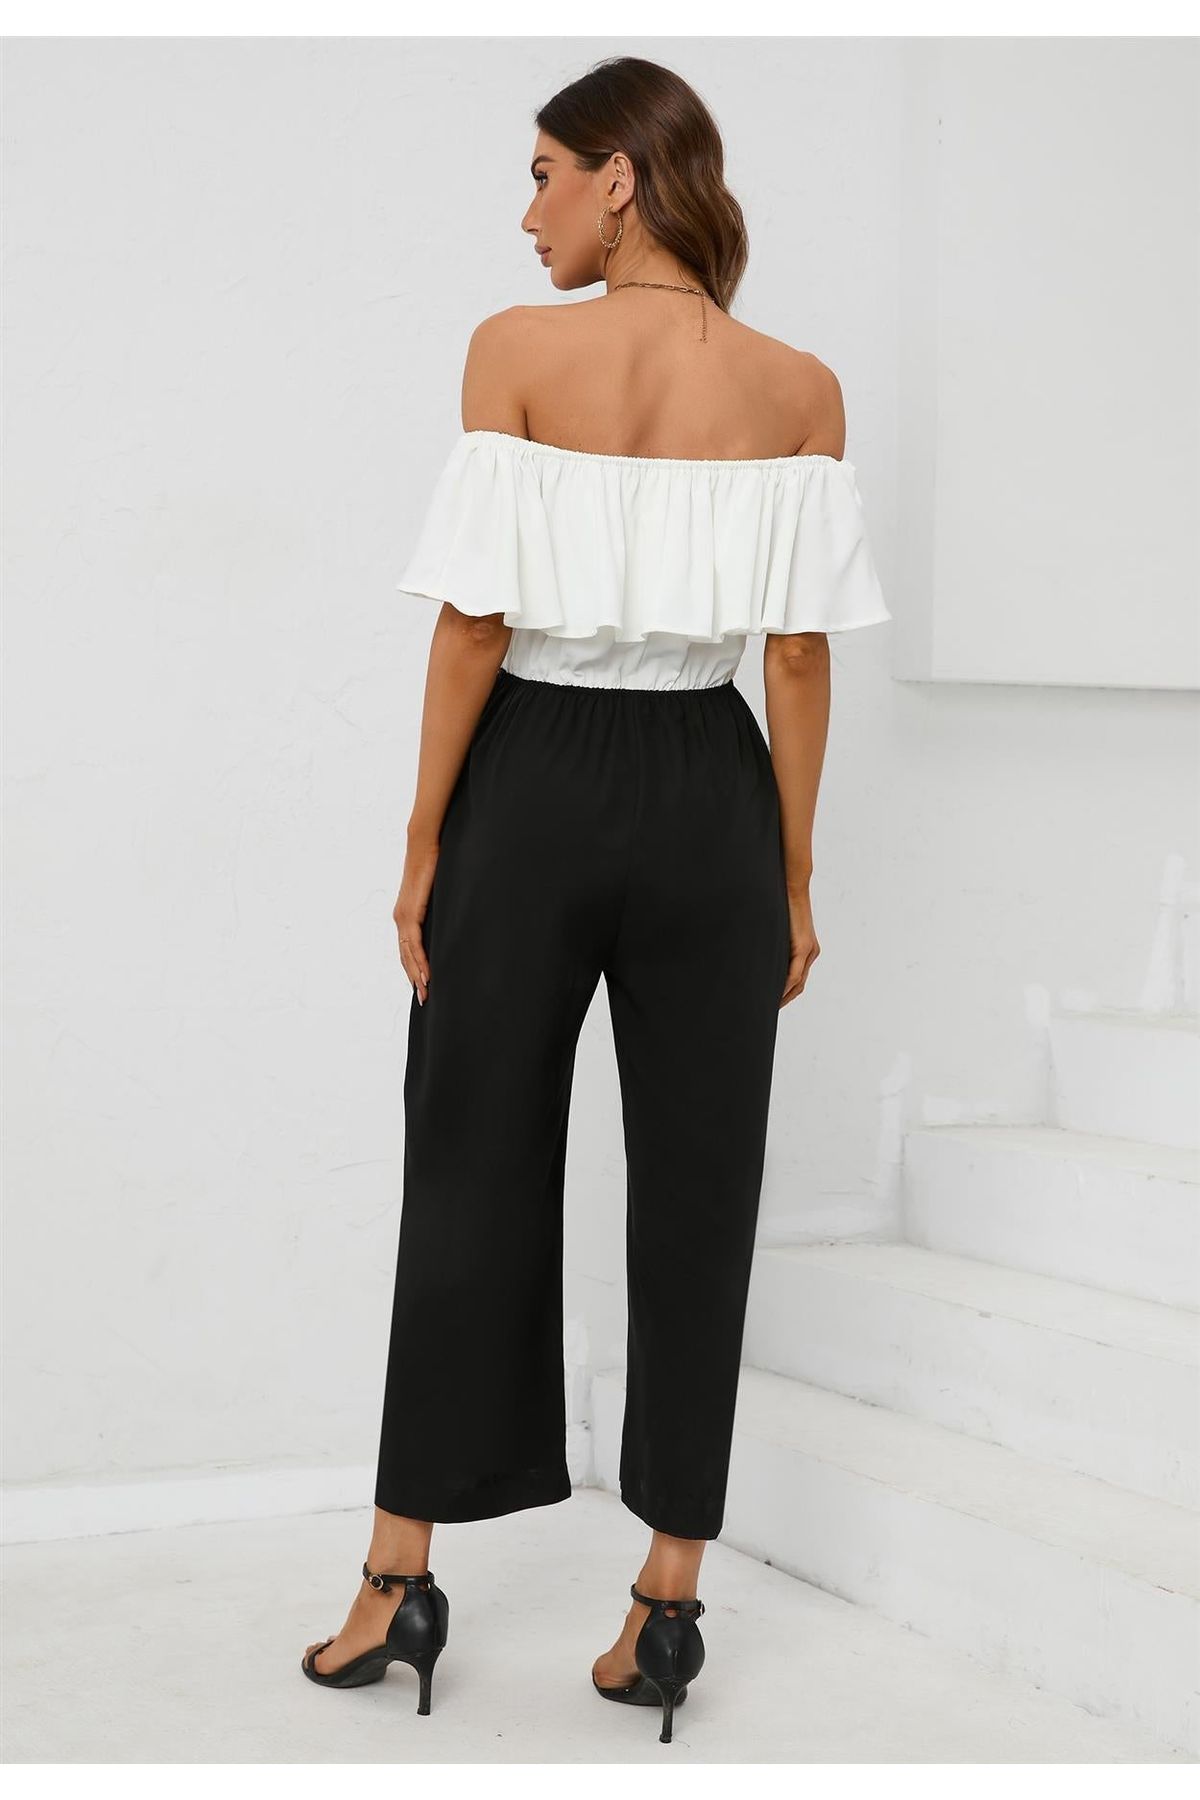 Black Contrast Off The Shoulder Ruffle Jumpsuit In White FS543